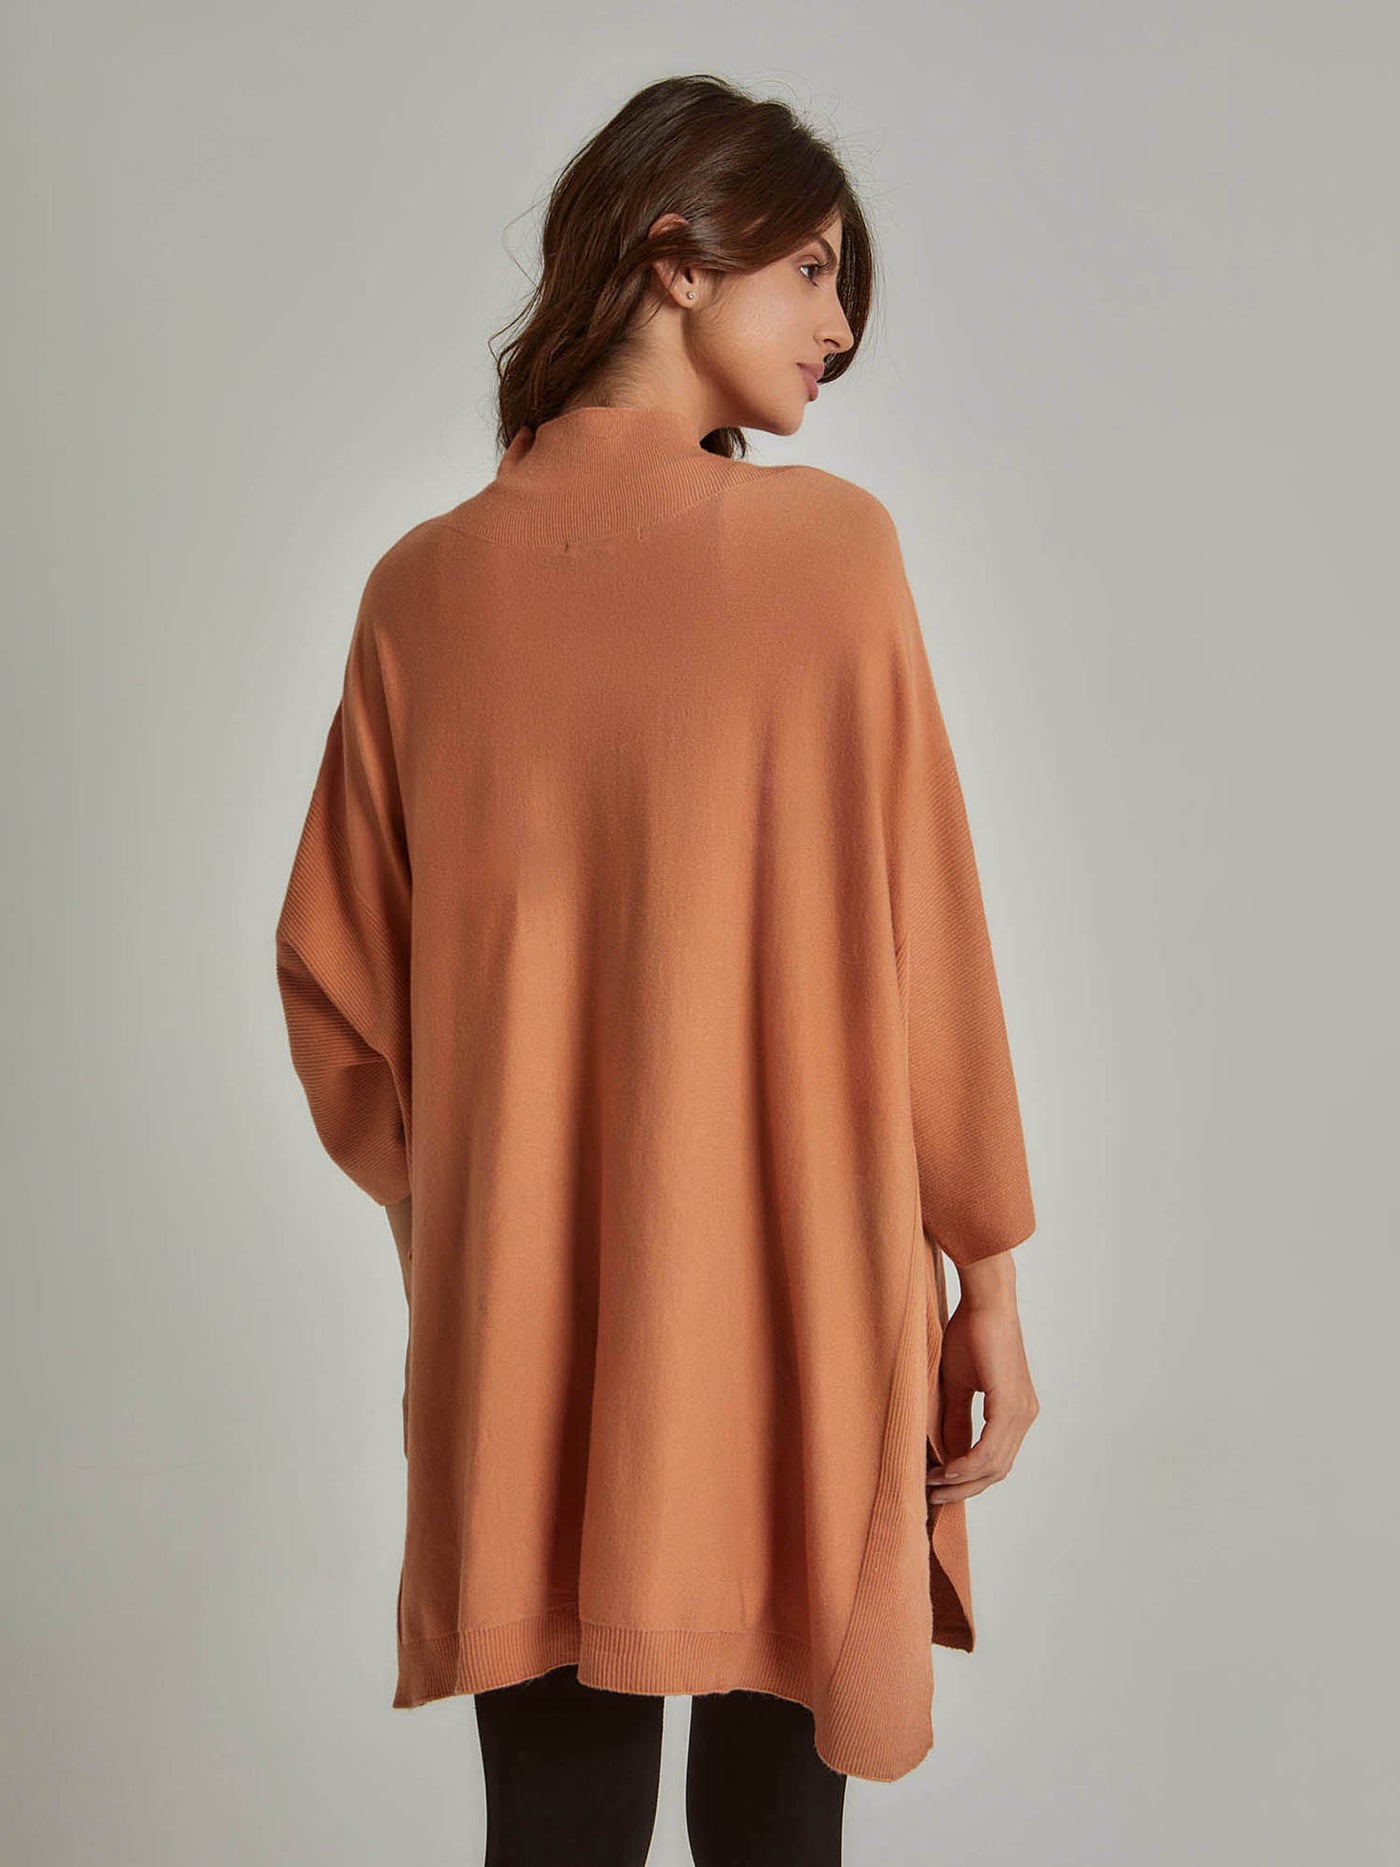 Poncho - Long Sleeves - Solid